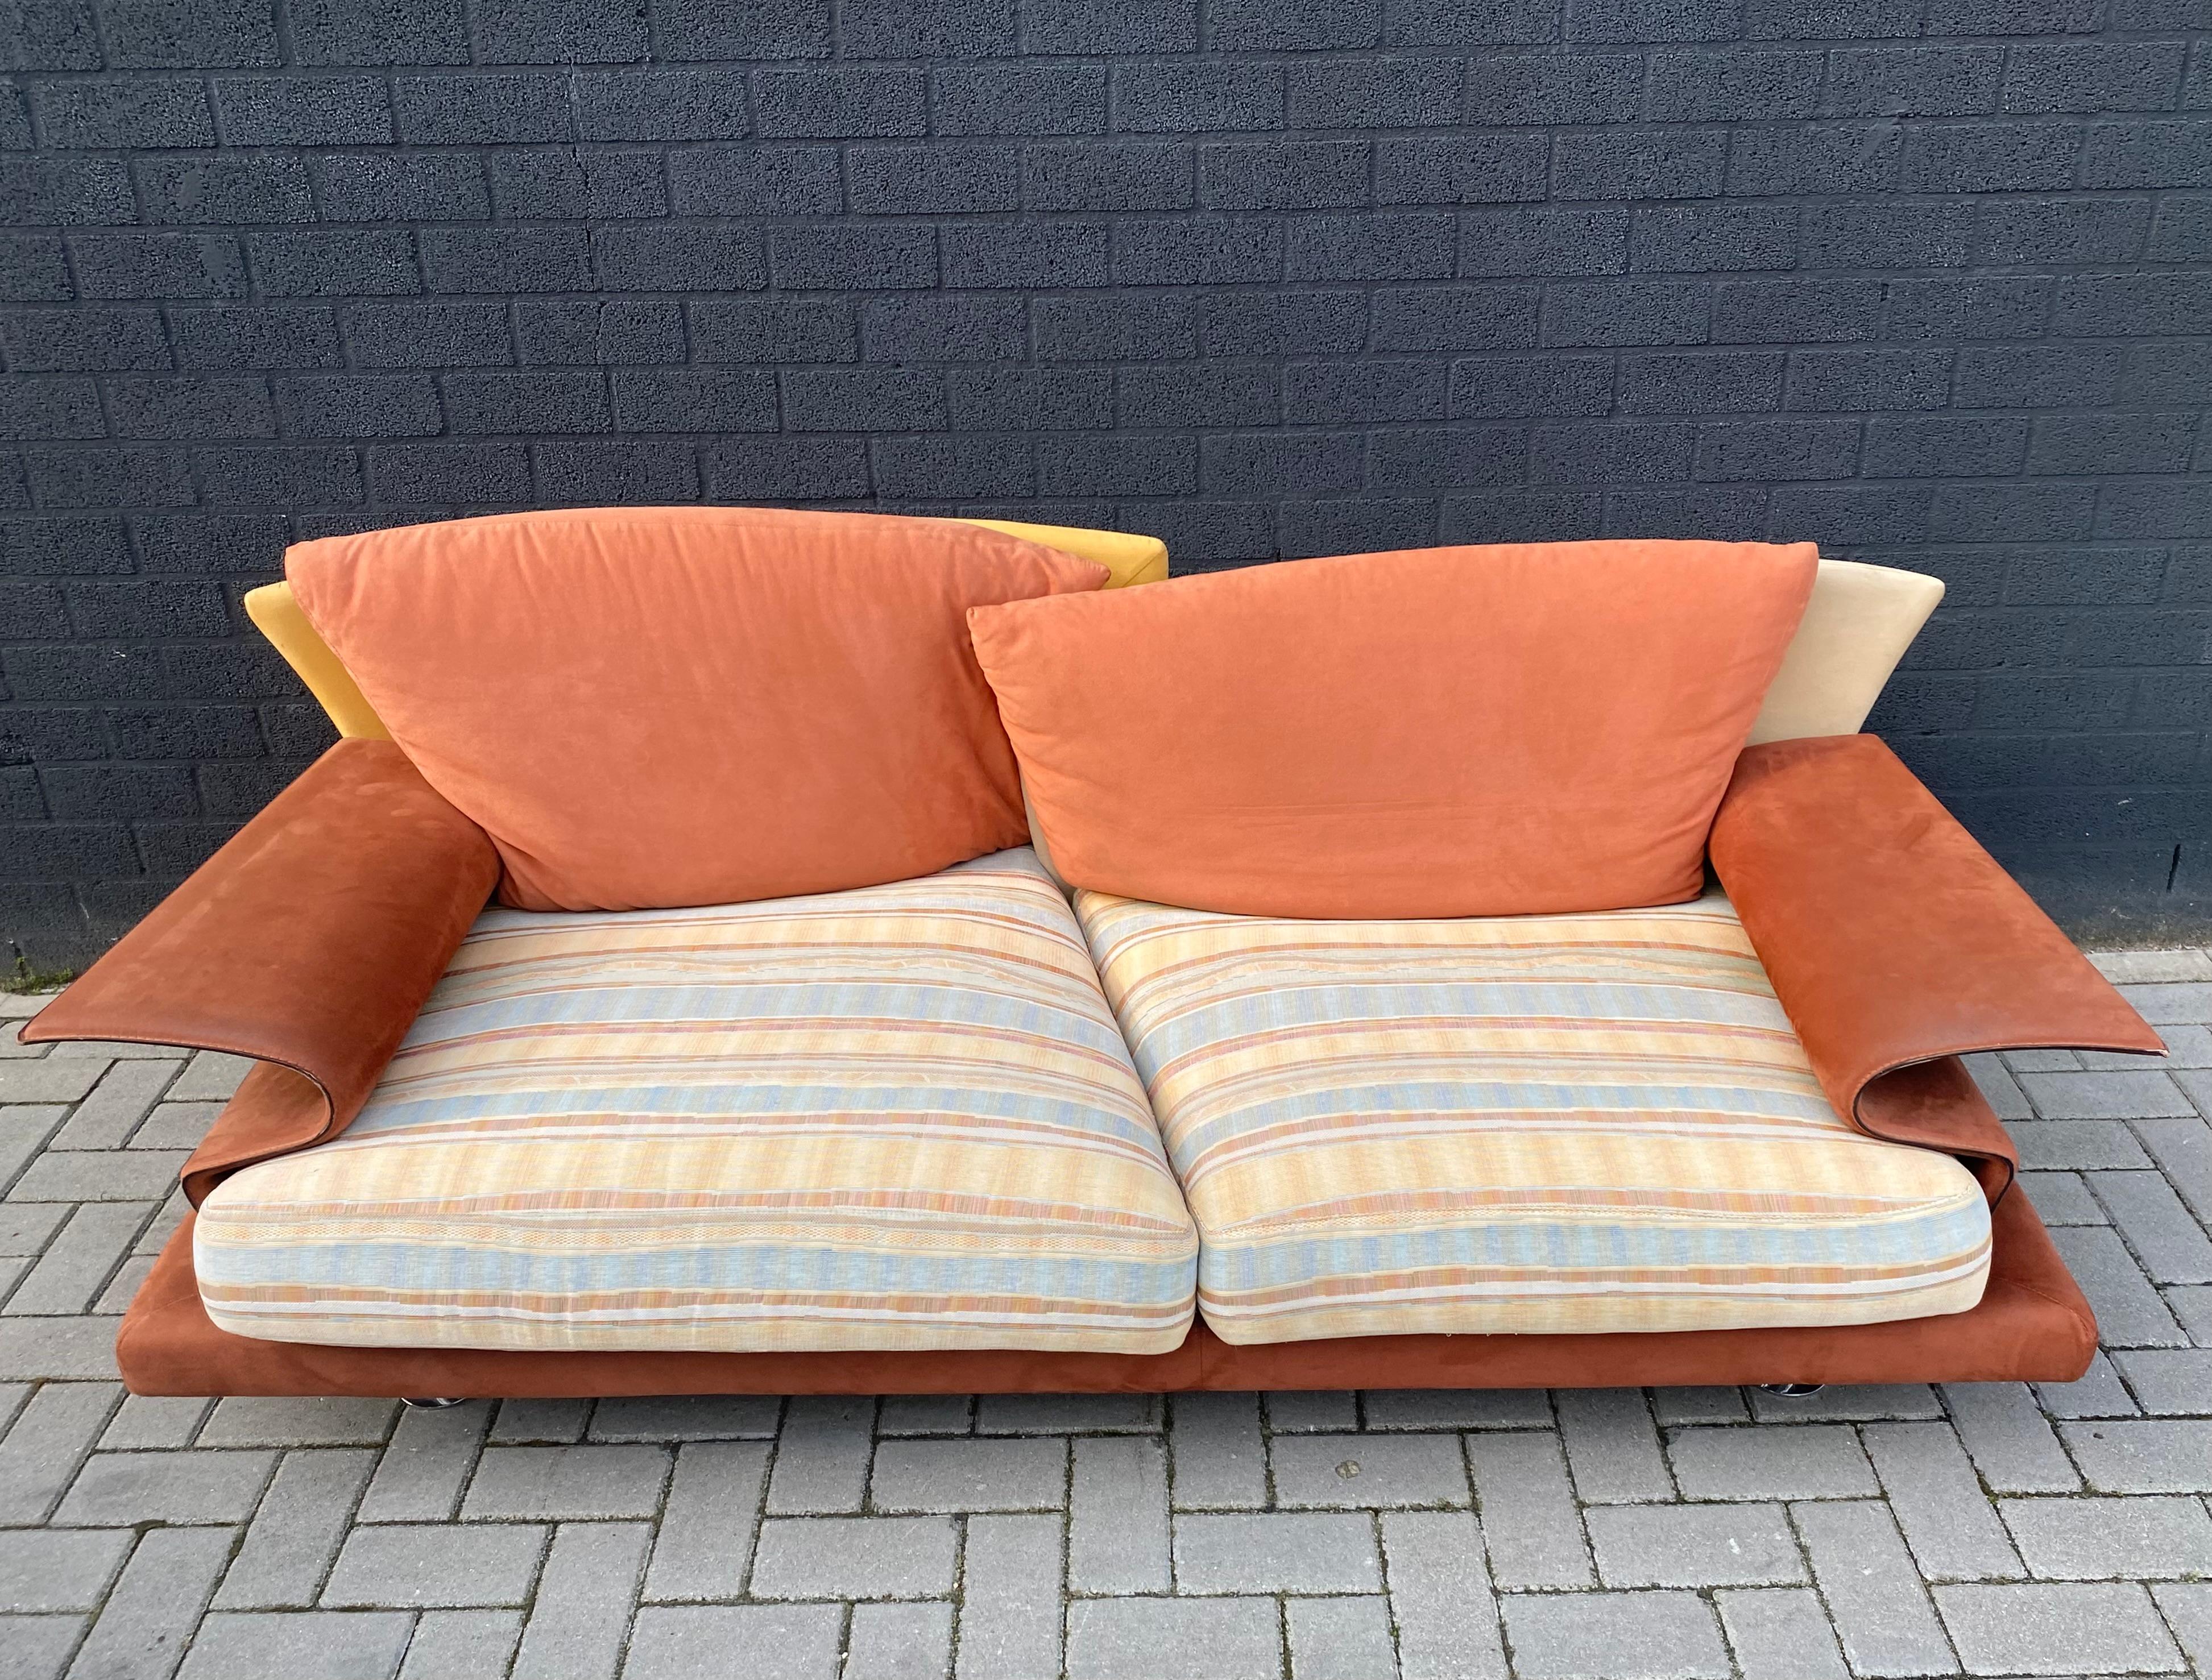 Great Post-Modern Super Roy Sofa with warm Mediterranean colours and soft fabric, designed by Giorgio Saporiti in Ca. The 1980s.
The sofa features a Steel frame, padded with resilient polyurethane foam. Overlapping curved backs which provide two